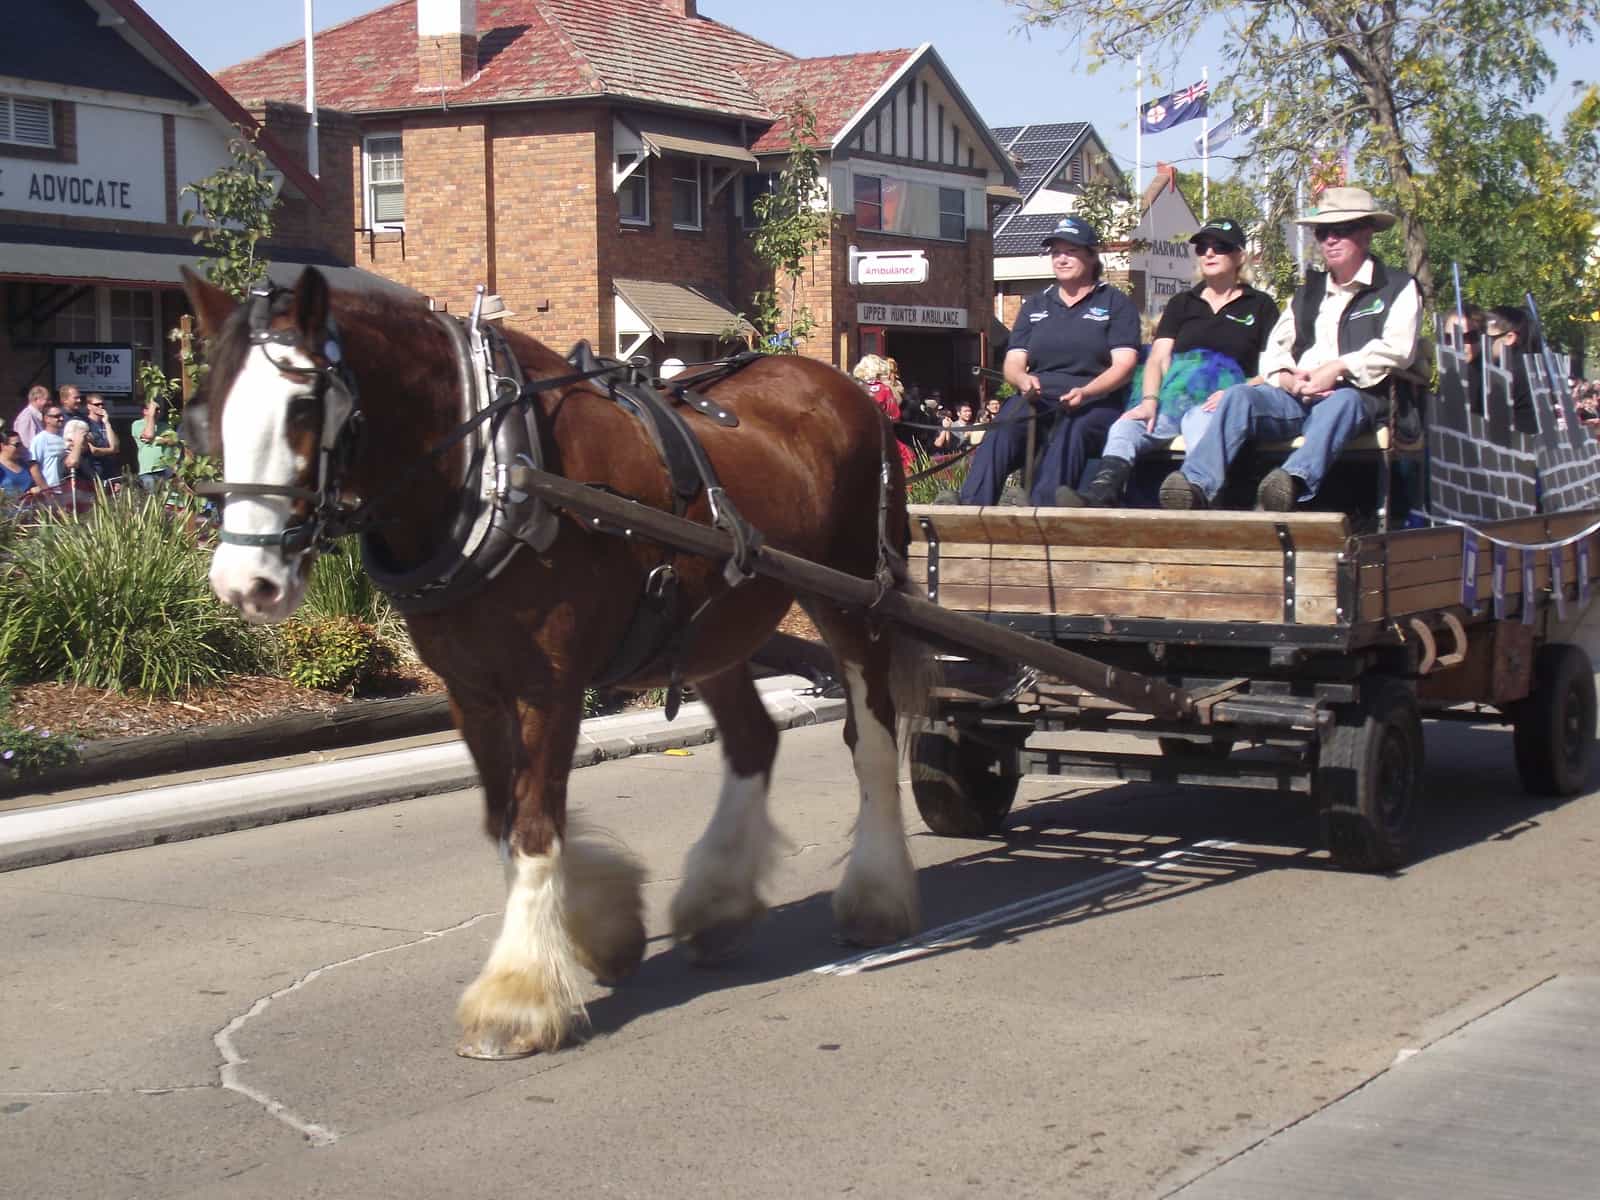 How much weight can a Clydesdale carry